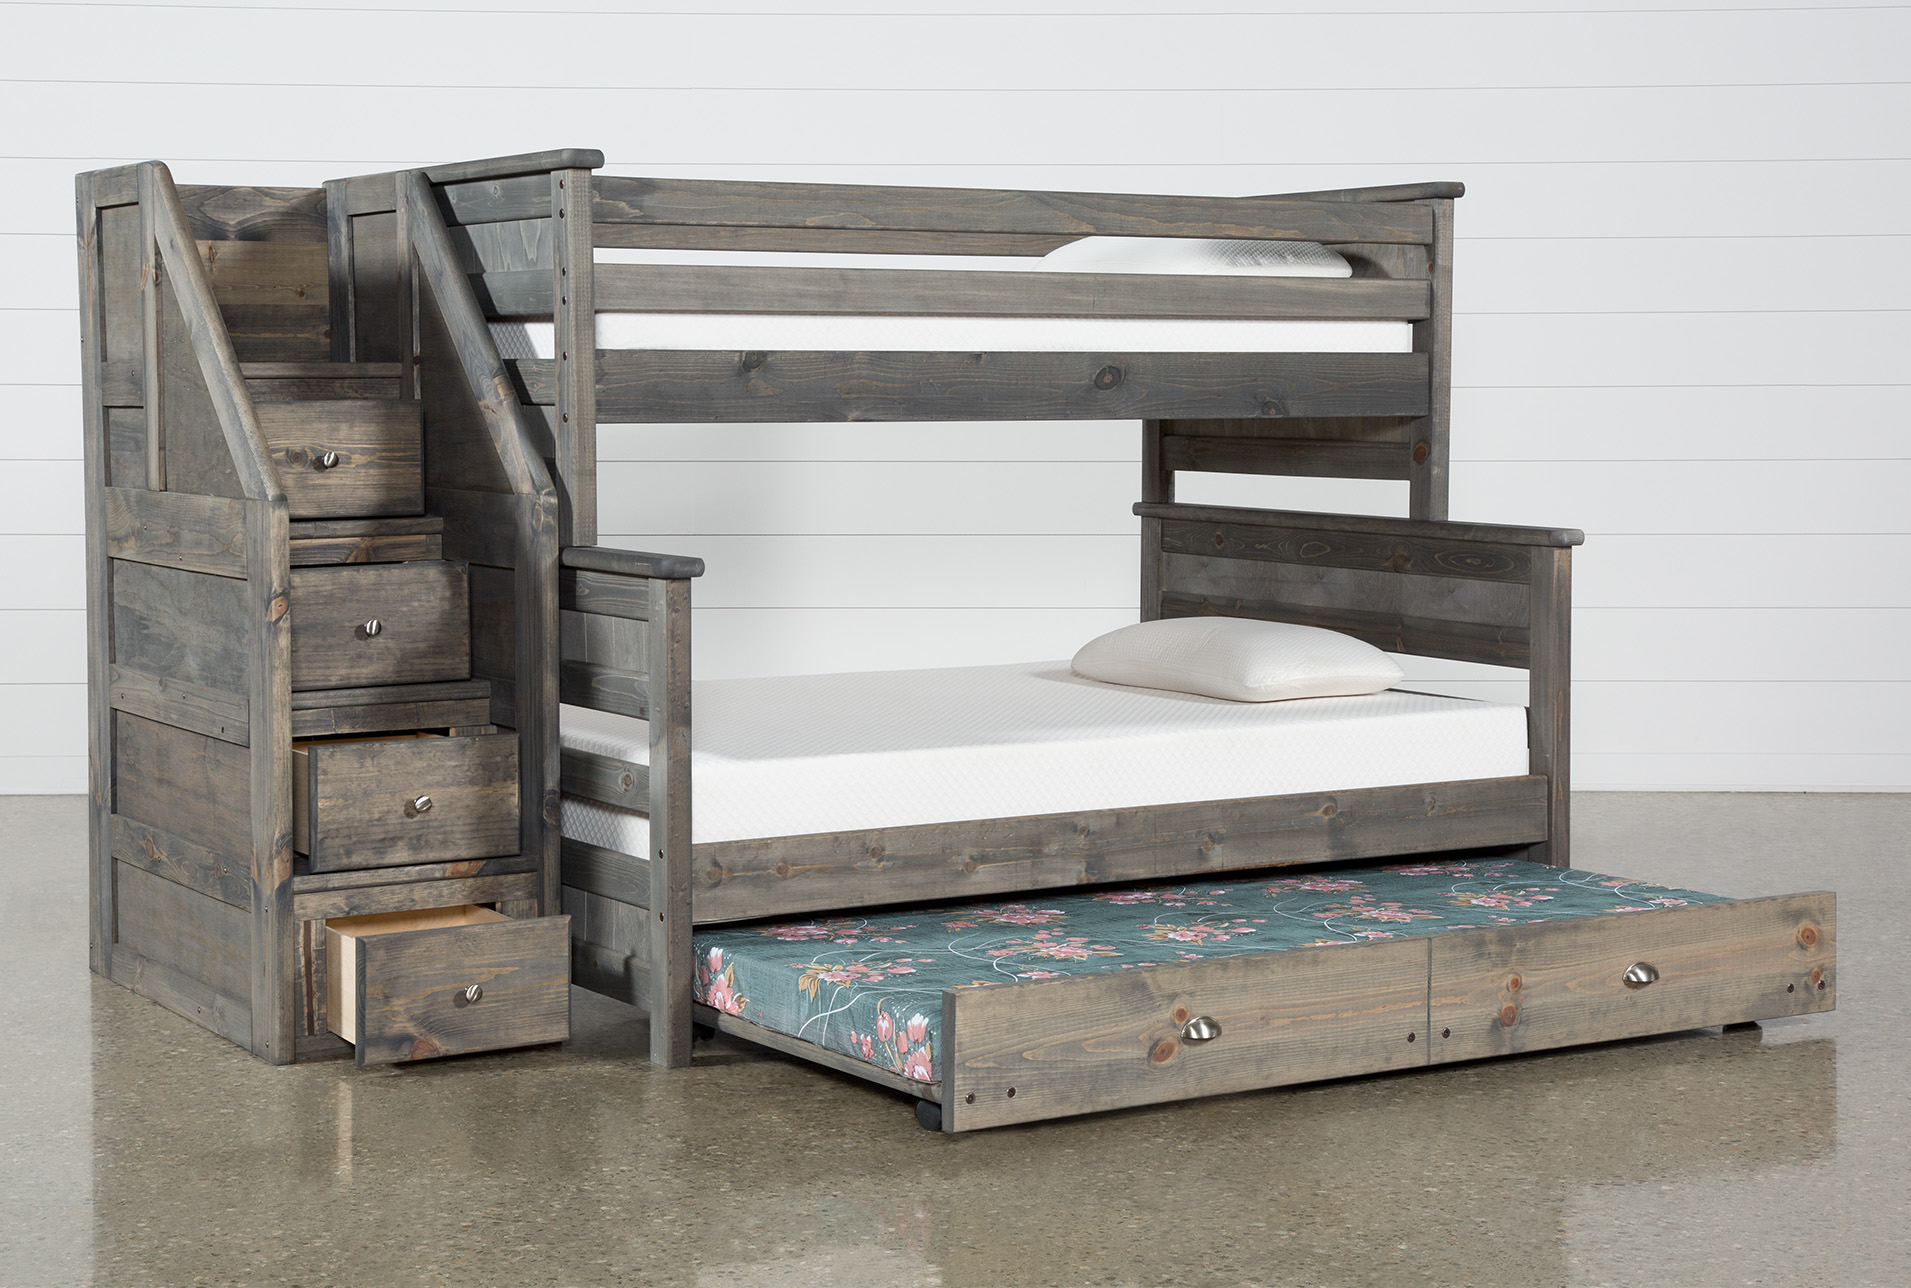 twin over full bunk bed with mattress